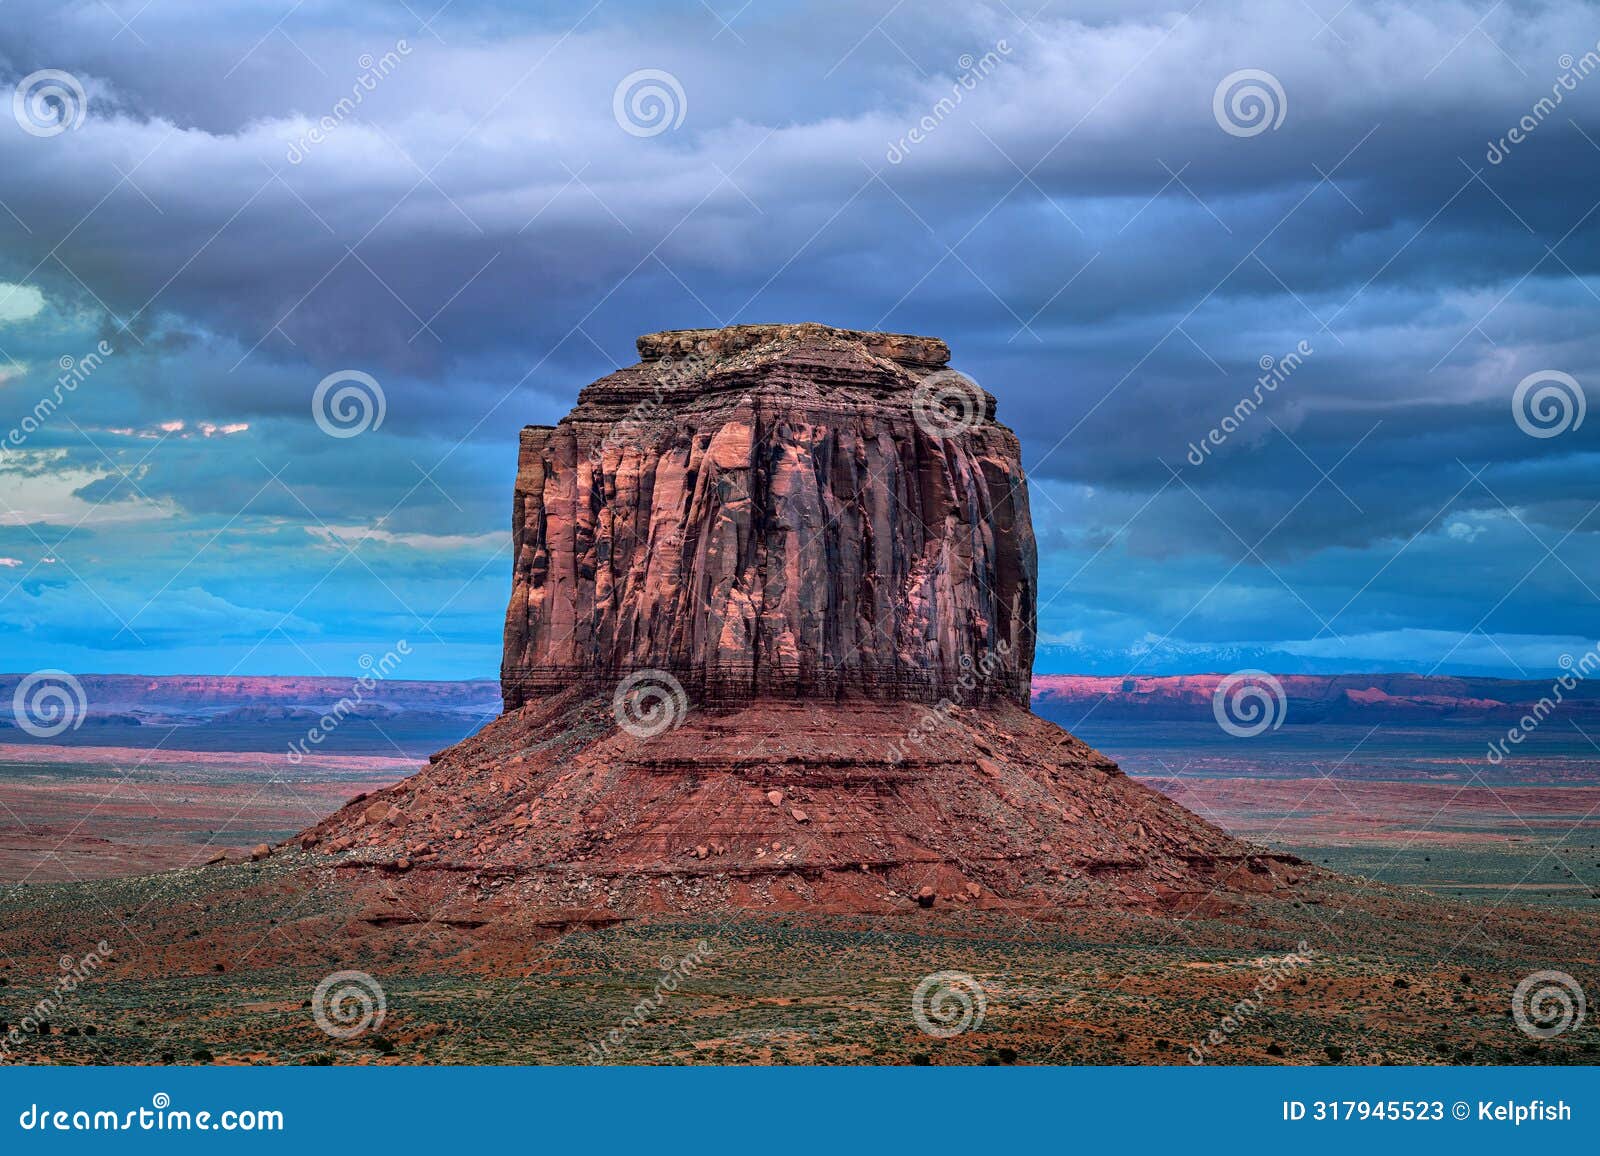 merrick butte in monument valley at dusk